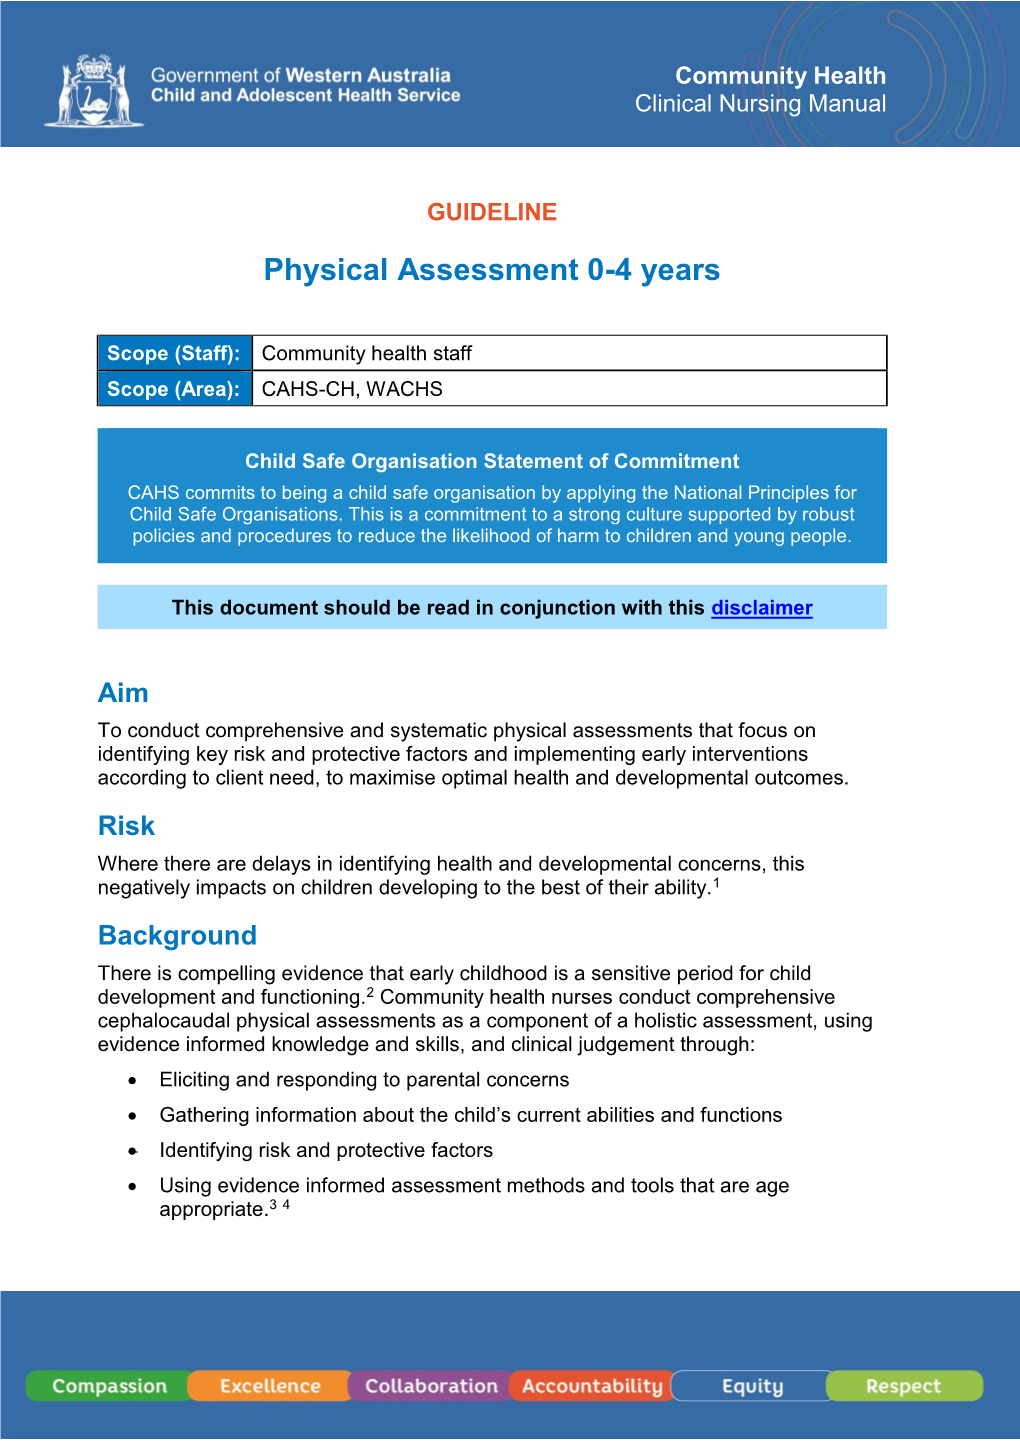 Physical Assessment 0-4 Years